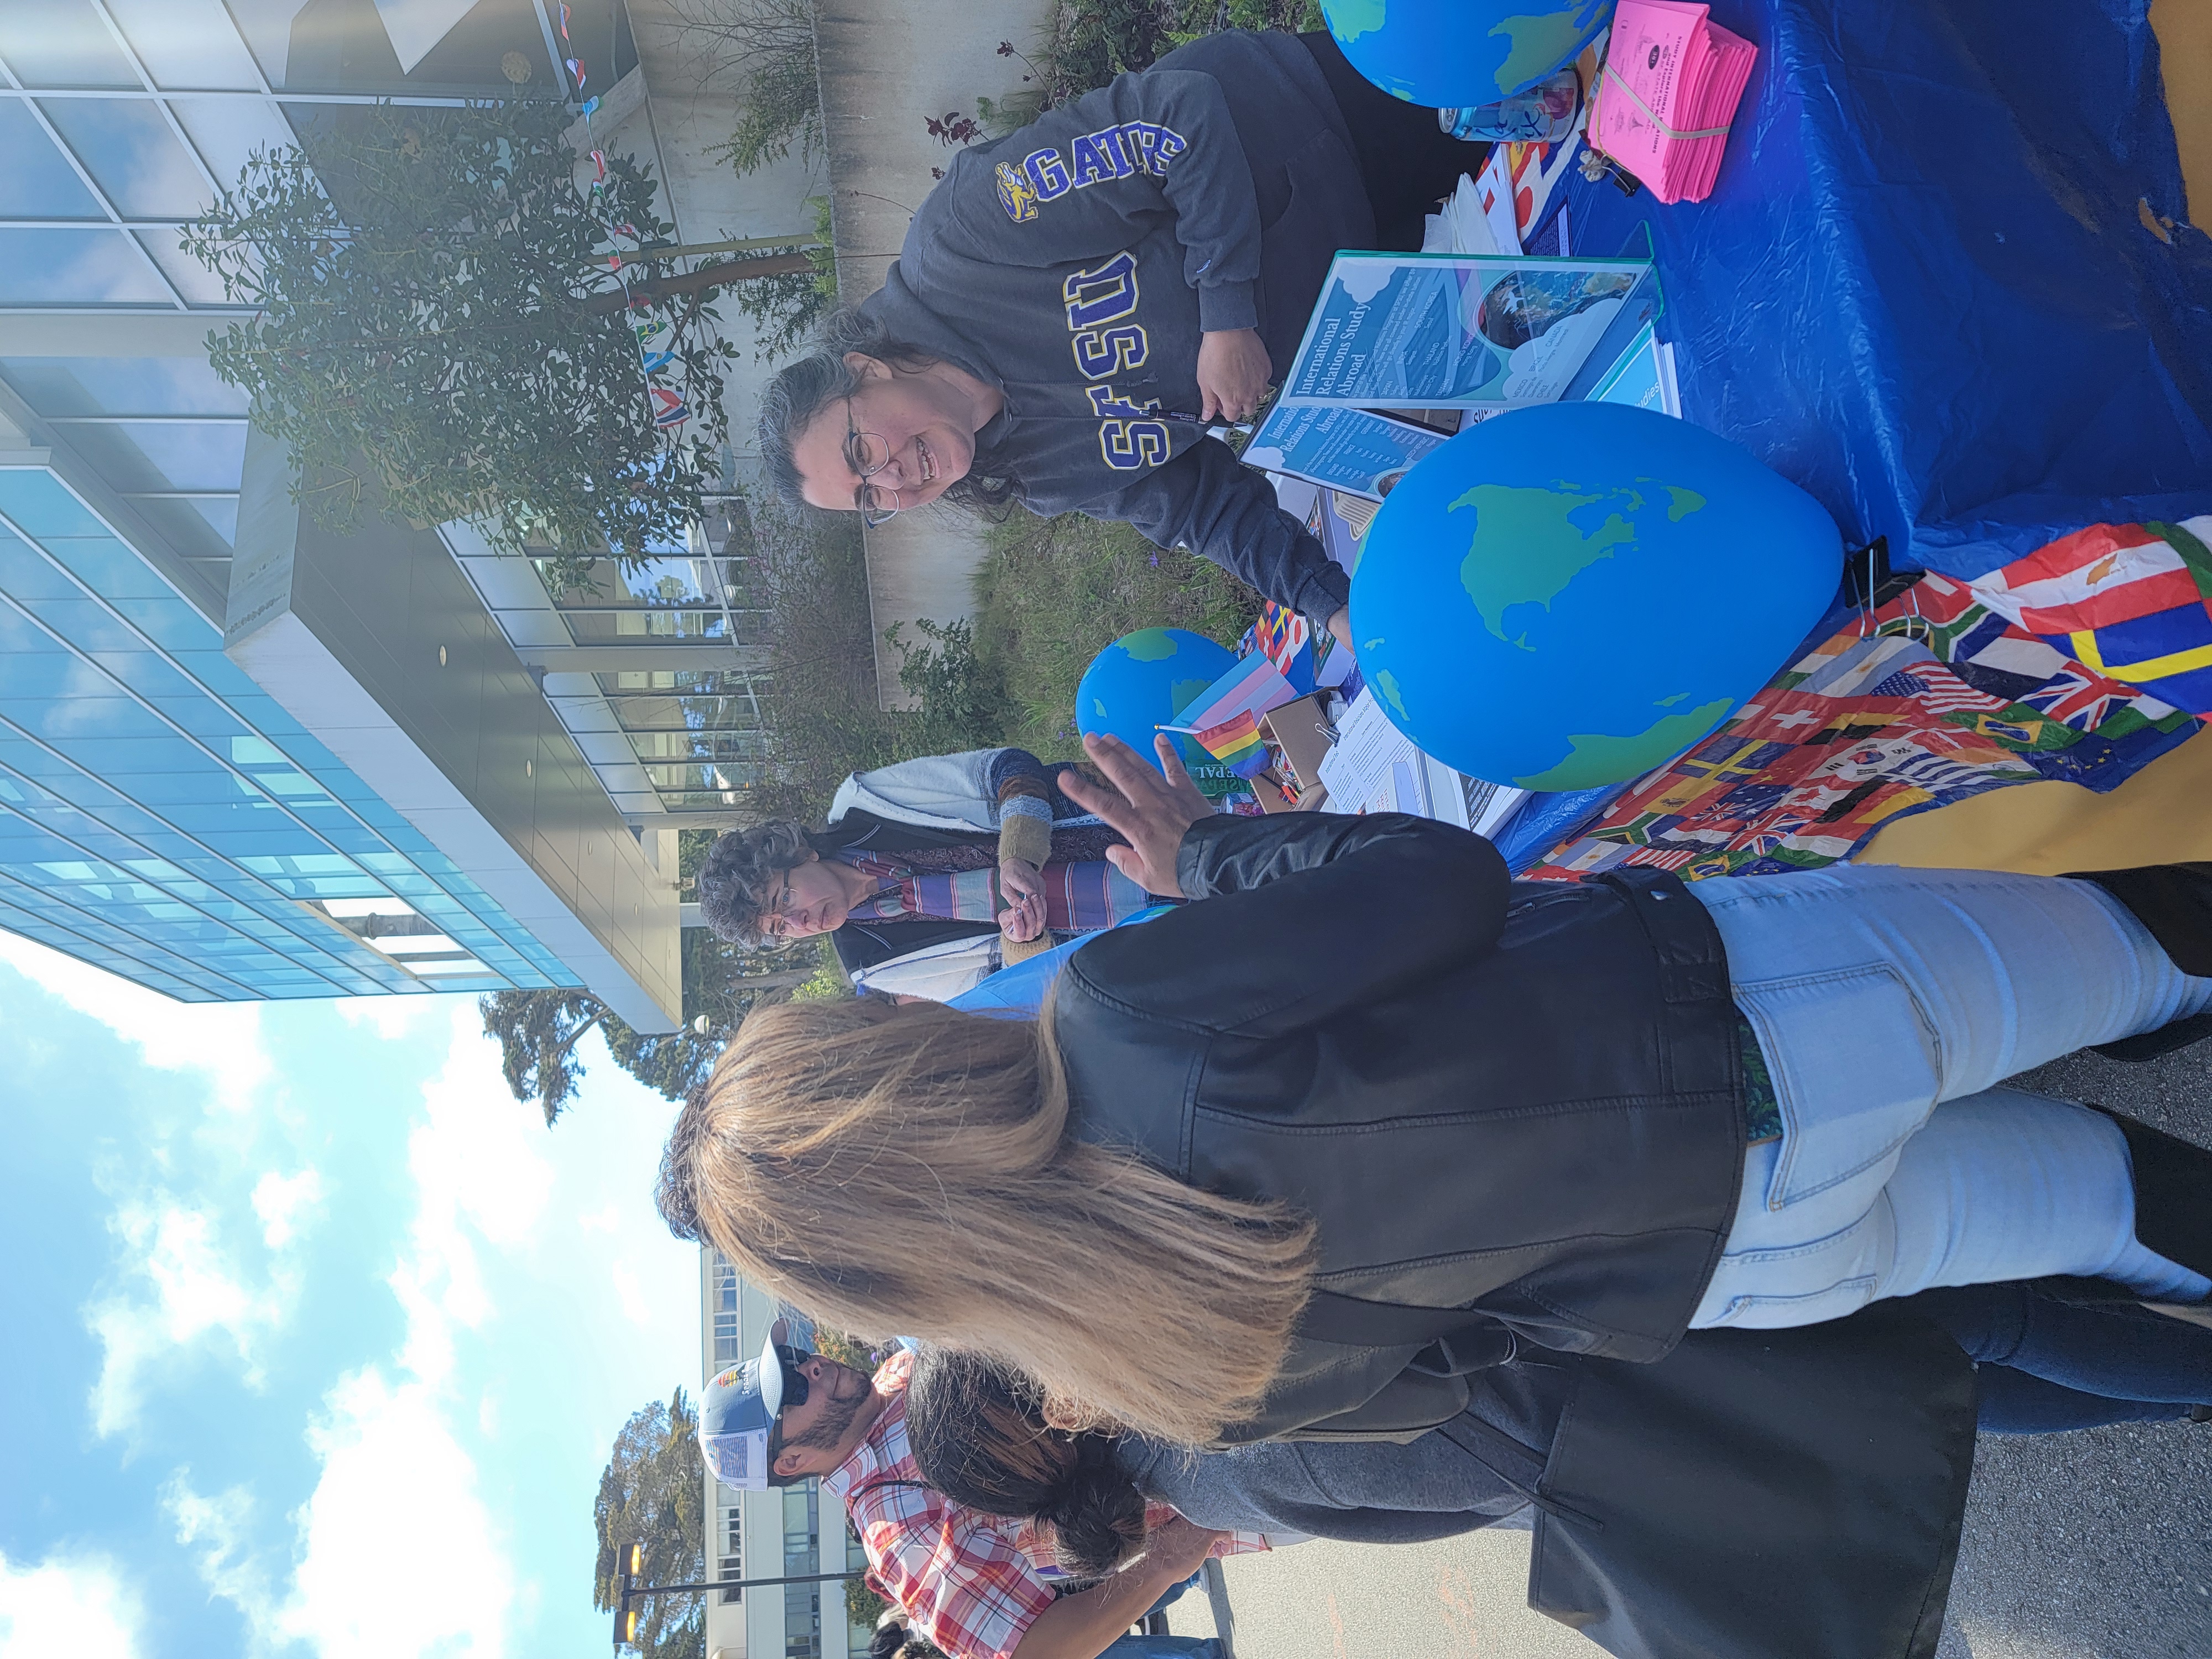 Professor Ellis speaks to a student at the International Relations Department table, which features globe-shaped balloons and flyers. Professor Volk stands nearby, speaking to another family.